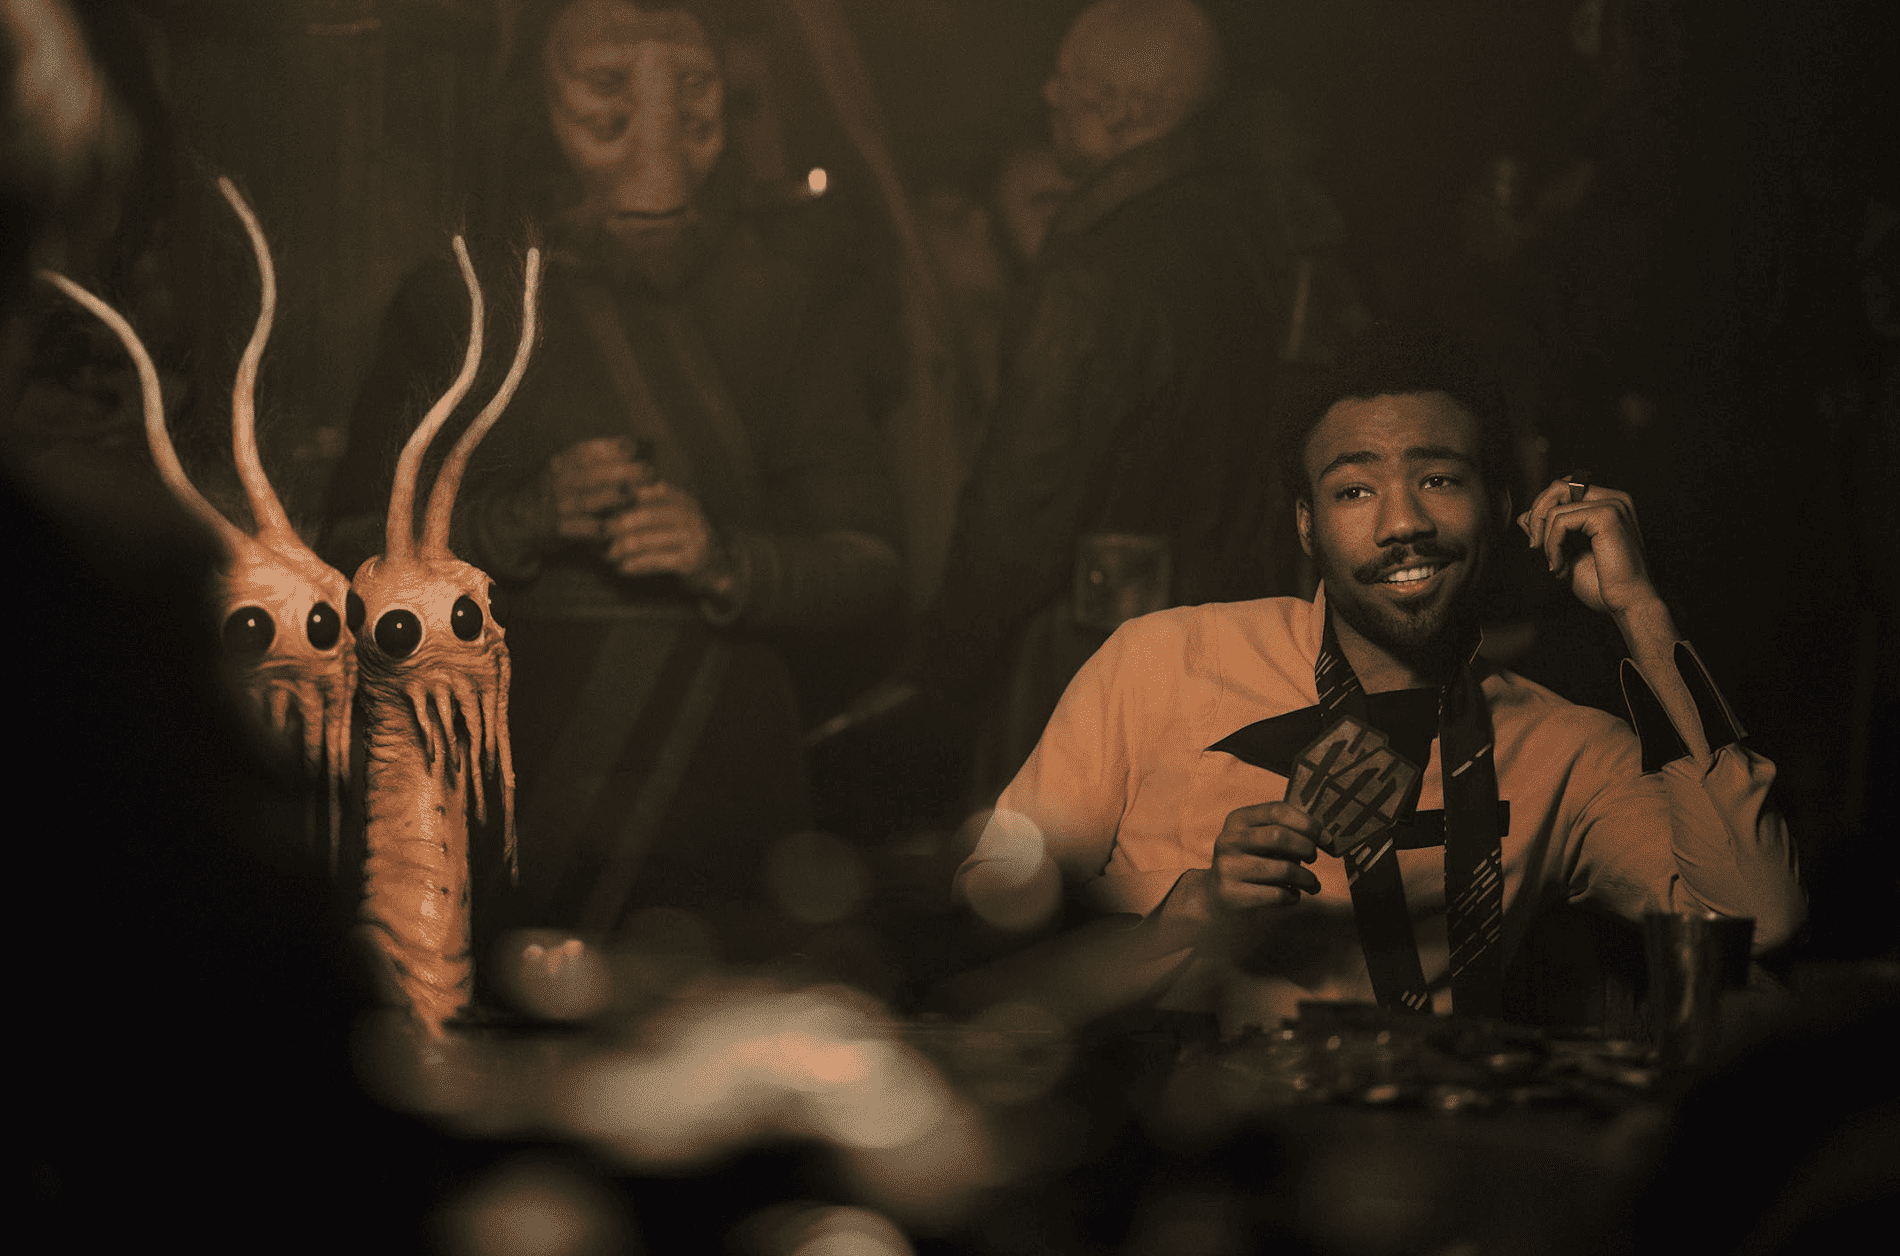 Lando plays card games in a dimly lit bar in this image from Lucasfilm.